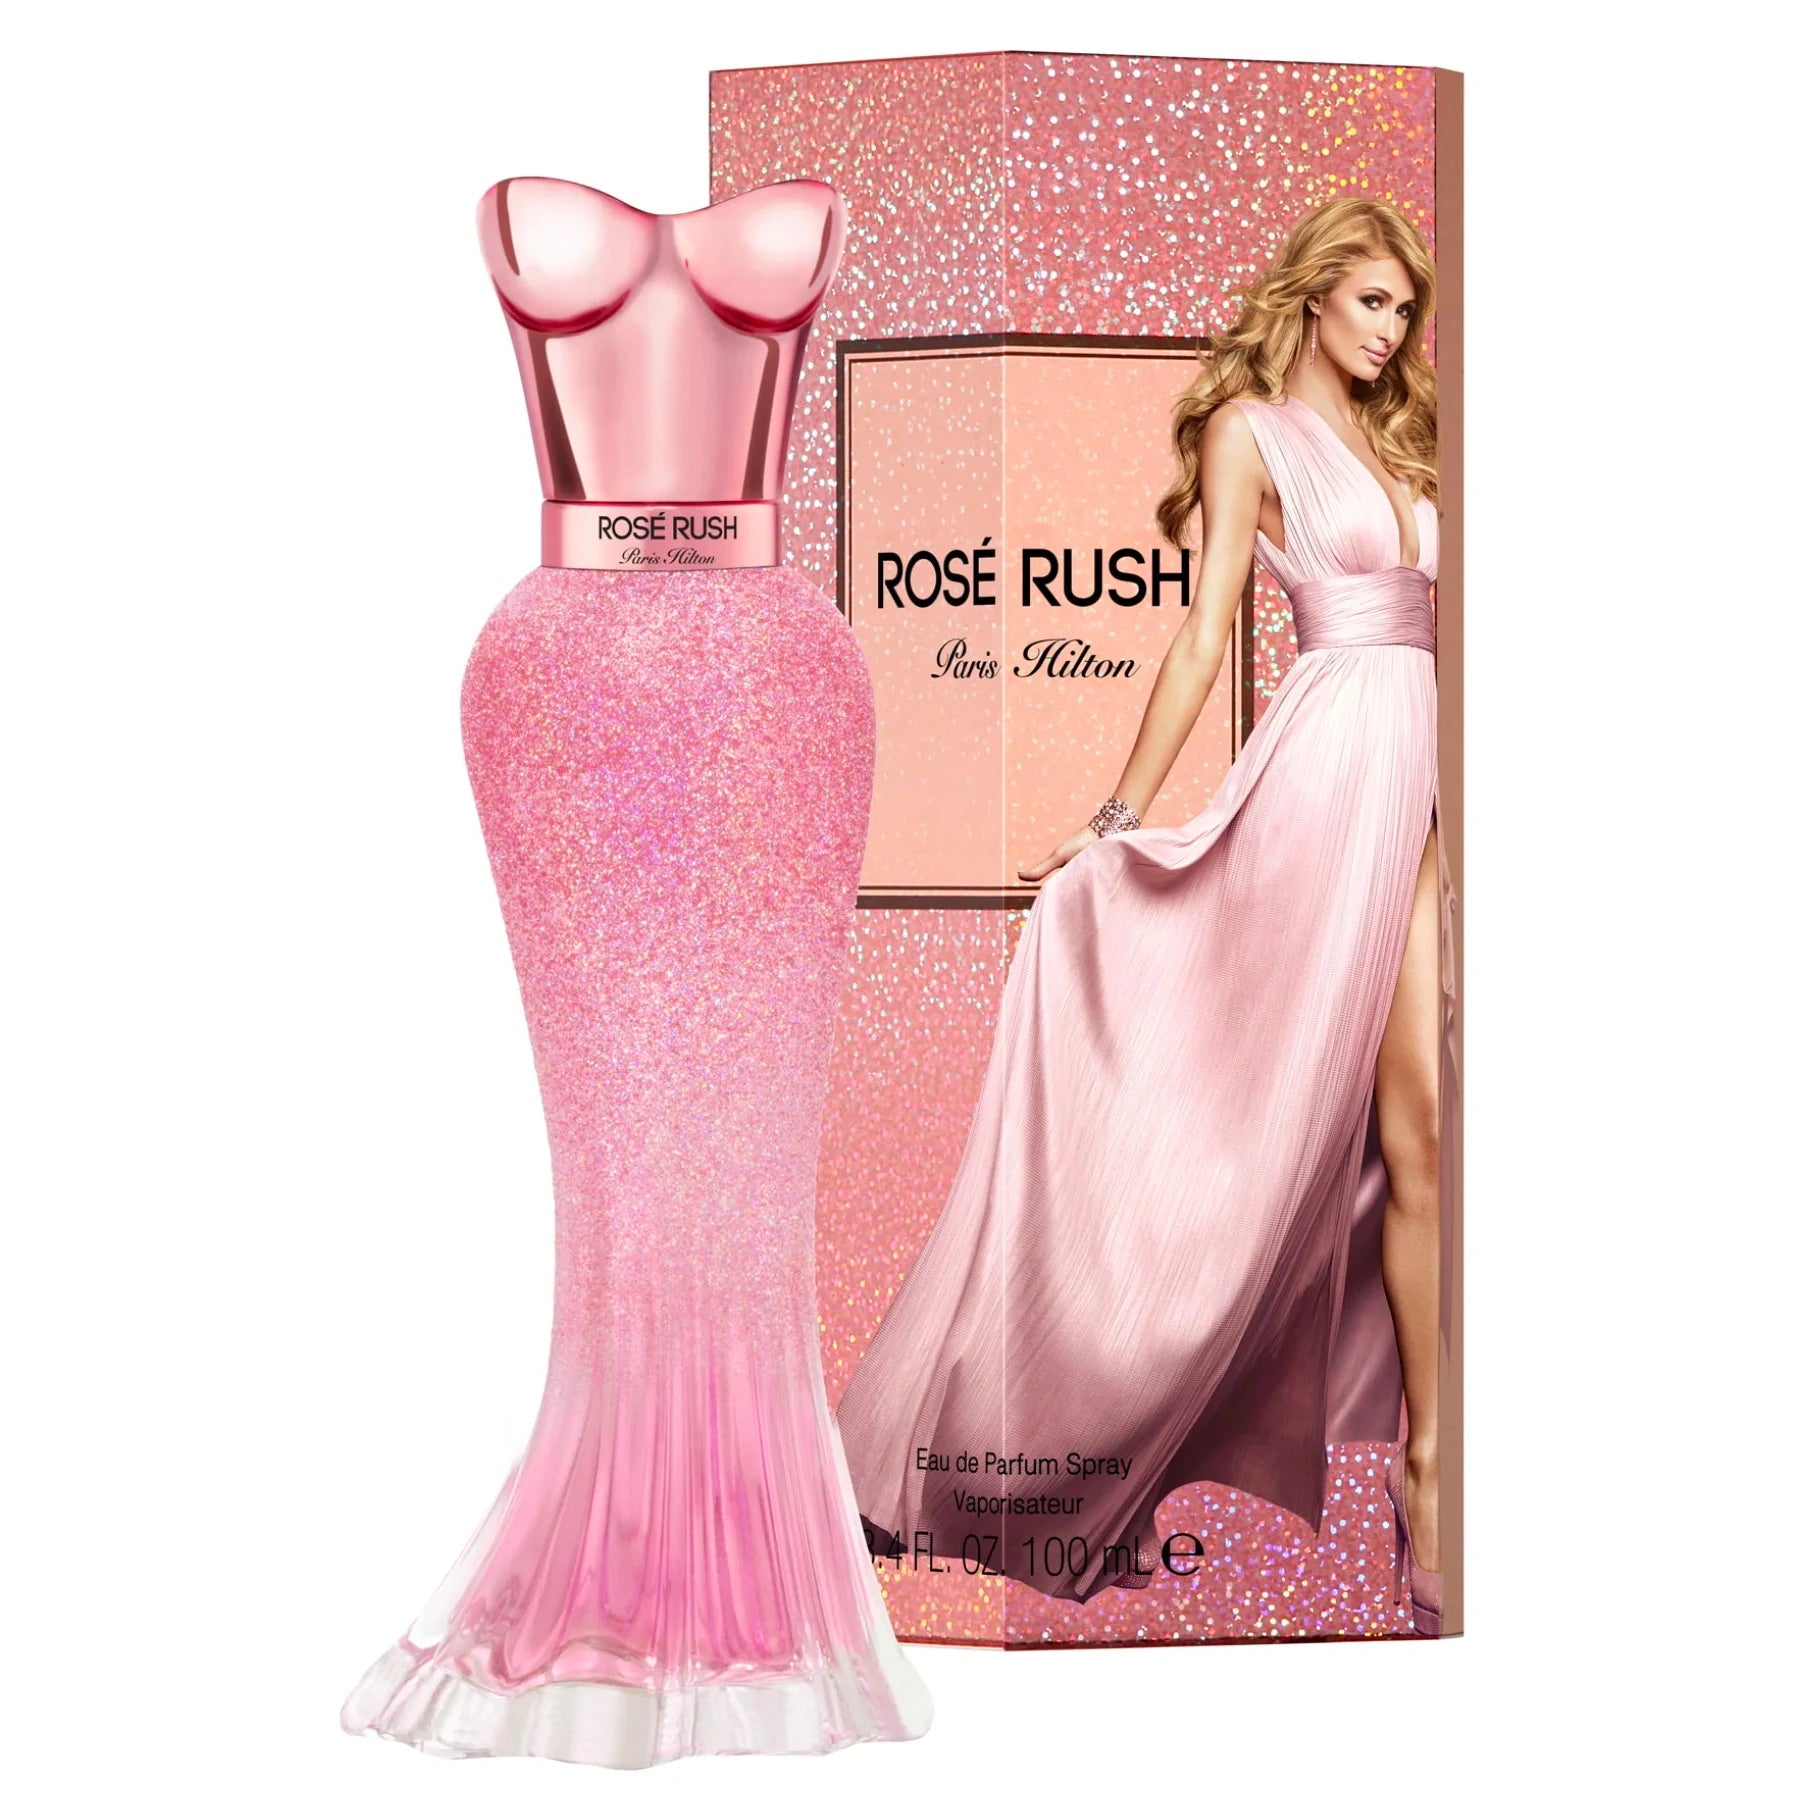 <p>Experience the enchanting femininity of Rose Rush by Paris Hilton. An indulgent blend of captivating florals, delicate Rose Petals and Lychee, accompanied by romantic Juicy Papaya, Amber and Cedarwood, creates a luxurious swirl of forever love. Allow yourself to be swept away!</p>